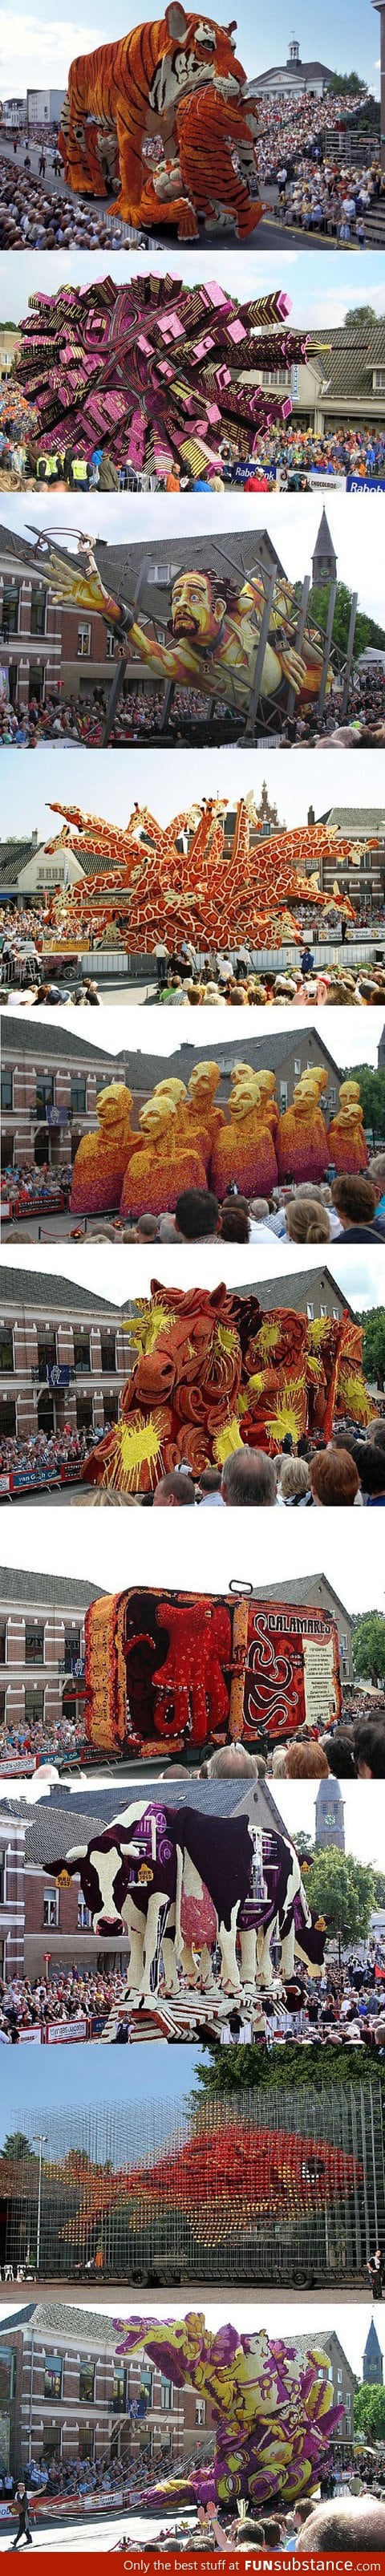 Corso Zundert in the Netherlands: these are all covered with flowers